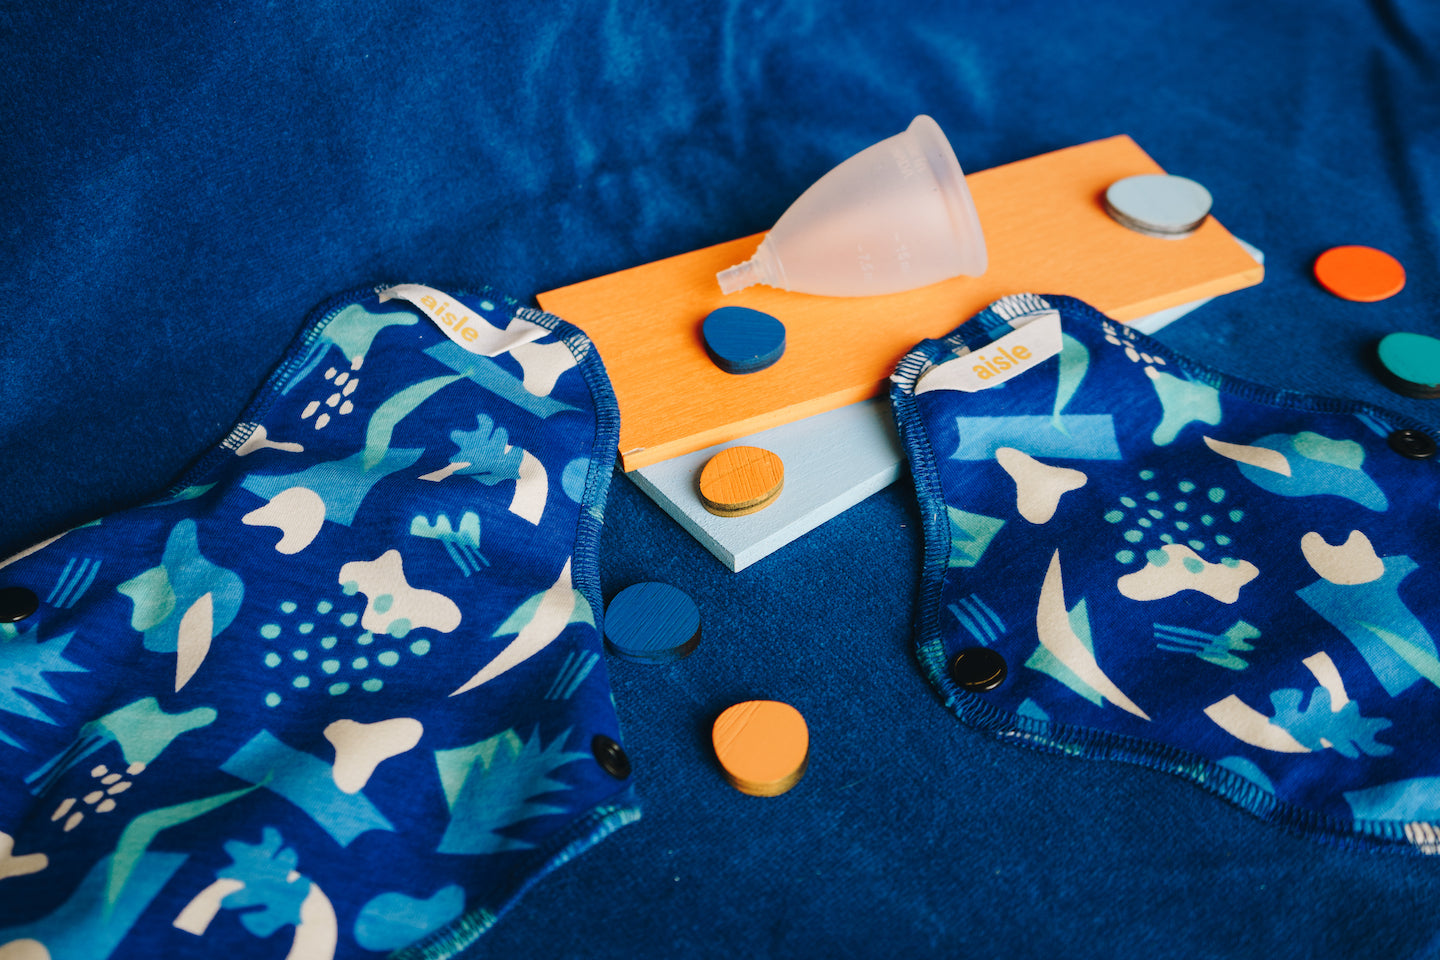 Two reusable pads and a menstrual cup placed on a blue background with various coloured shapes amongst them.